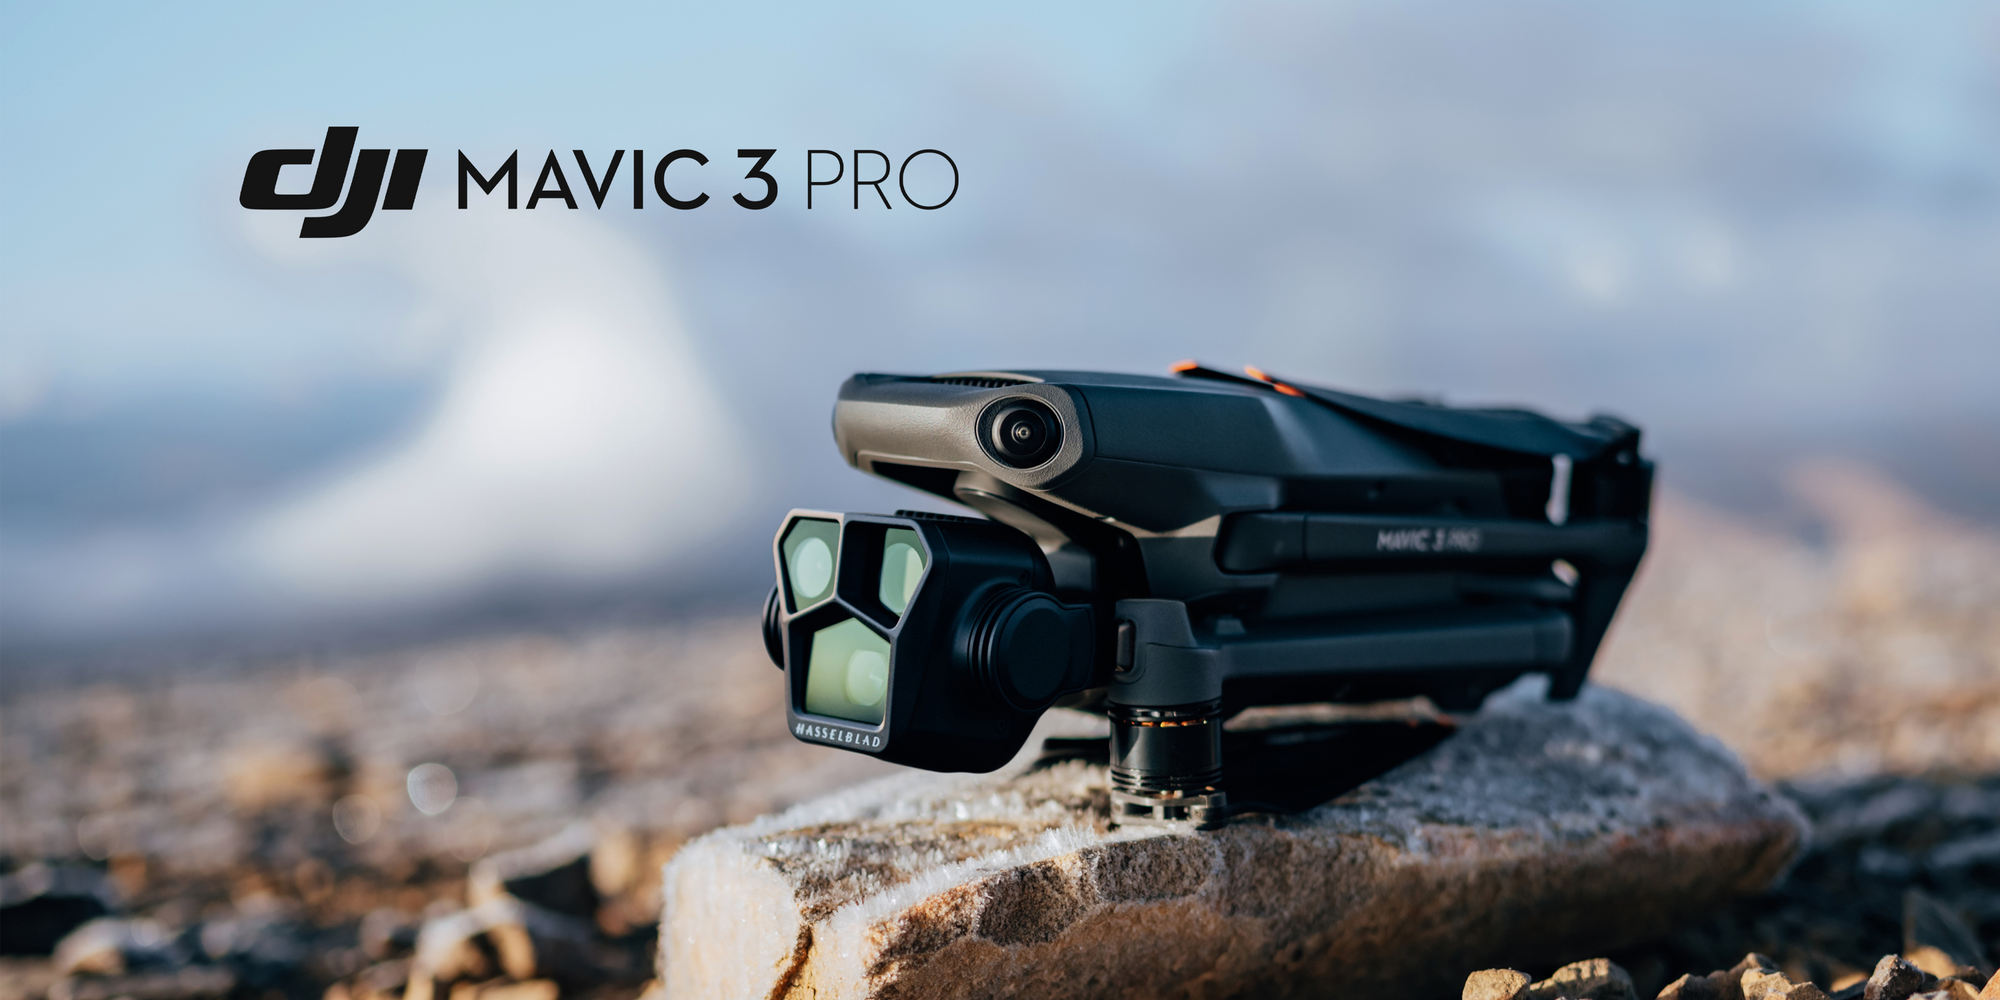 DJI Mavic 3 Pro: The Next Step In Superior Aerial Photography